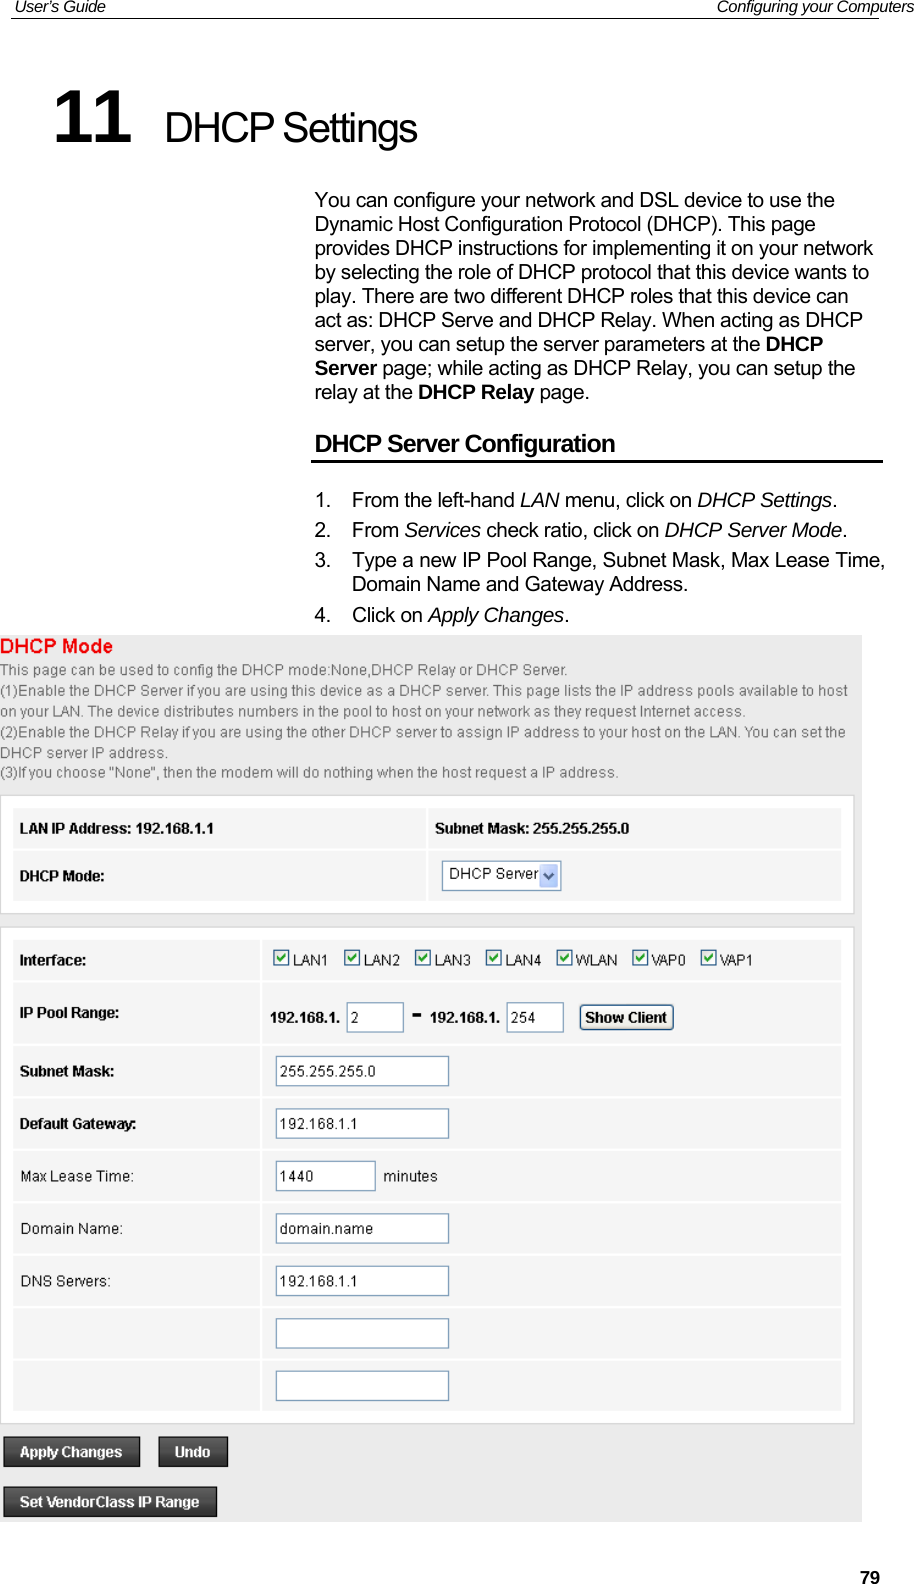 User’s Guide   Configuring your Computers  7911  DHCP Settings You can configure your network and DSL device to use the Dynamic Host Configuration Protocol (DHCP). This page provides DHCP instructions for implementing it on your network by selecting the role of DHCP protocol that this device wants to play. There are two different DHCP roles that this device can act as: DHCP Serve and DHCP Relay. When acting as DHCP server, you can setup the server parameters at the DHCP Server page; while acting as DHCP Relay, you can setup the relay at the DHCP Relay page. DHCP Server Configuration 1.  From the left-hand LAN menu, click on DHCP Settings. 2. From Services check ratio, click on DHCP Server Mode. 3.  Type a new IP Pool Range, Subnet Mask, Max Lease Time, Domain Name and Gateway Address. 4. Click on Apply Changes.  